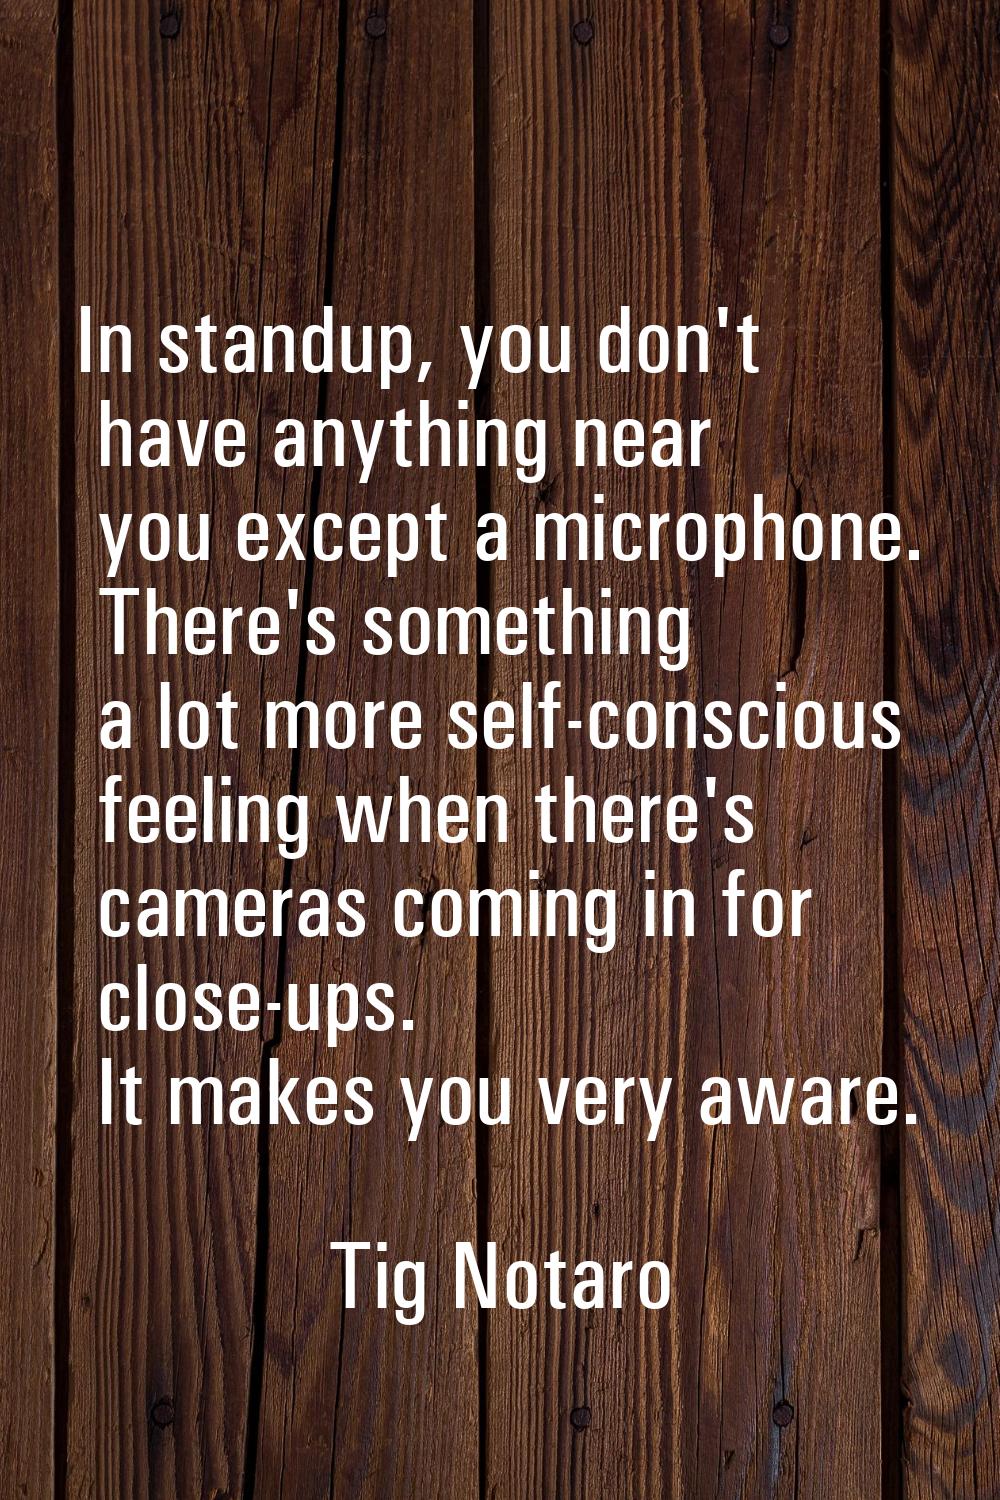 In standup, you don't have anything near you except a microphone. There's something a lot more self